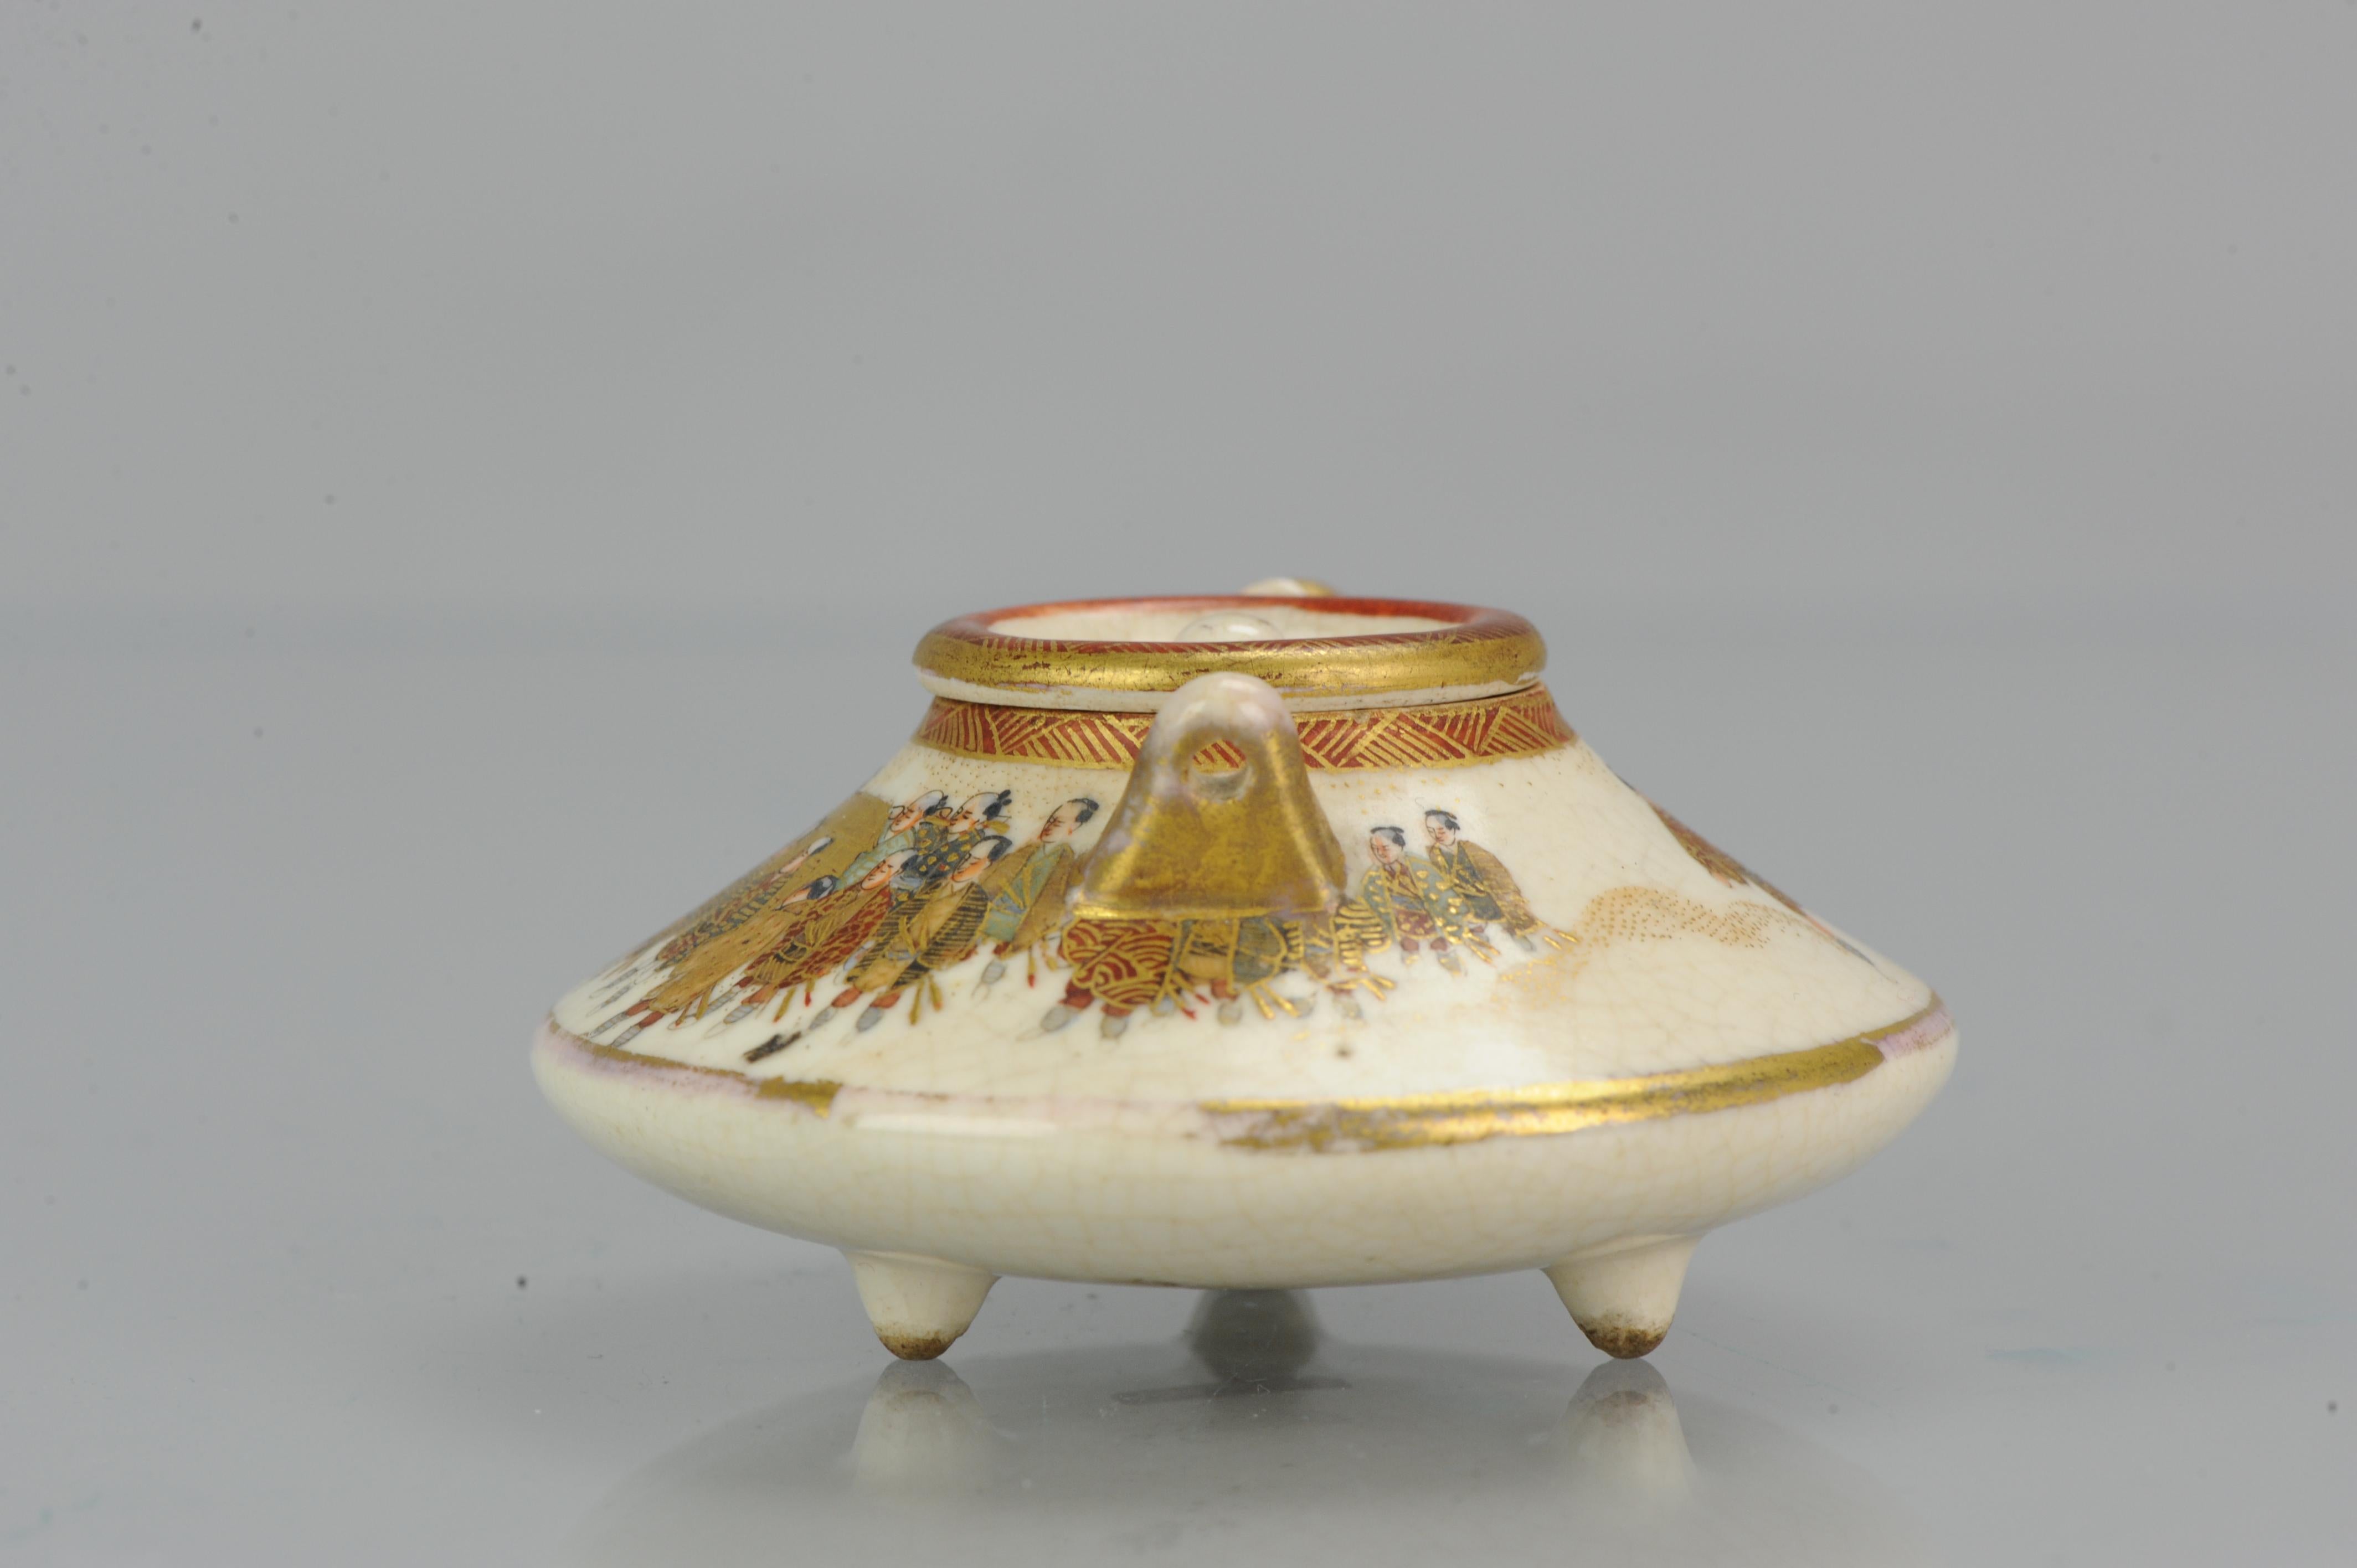 Fabulous small Japanese. Absolute top quality decoration an pottery. Marked at the base.

Additional information:
Material: Porcelain & Pottery
Region of Origin: Japan
Period: Meiji Periode (1867-1912)
Age: 19th century
Original/Reproduction: